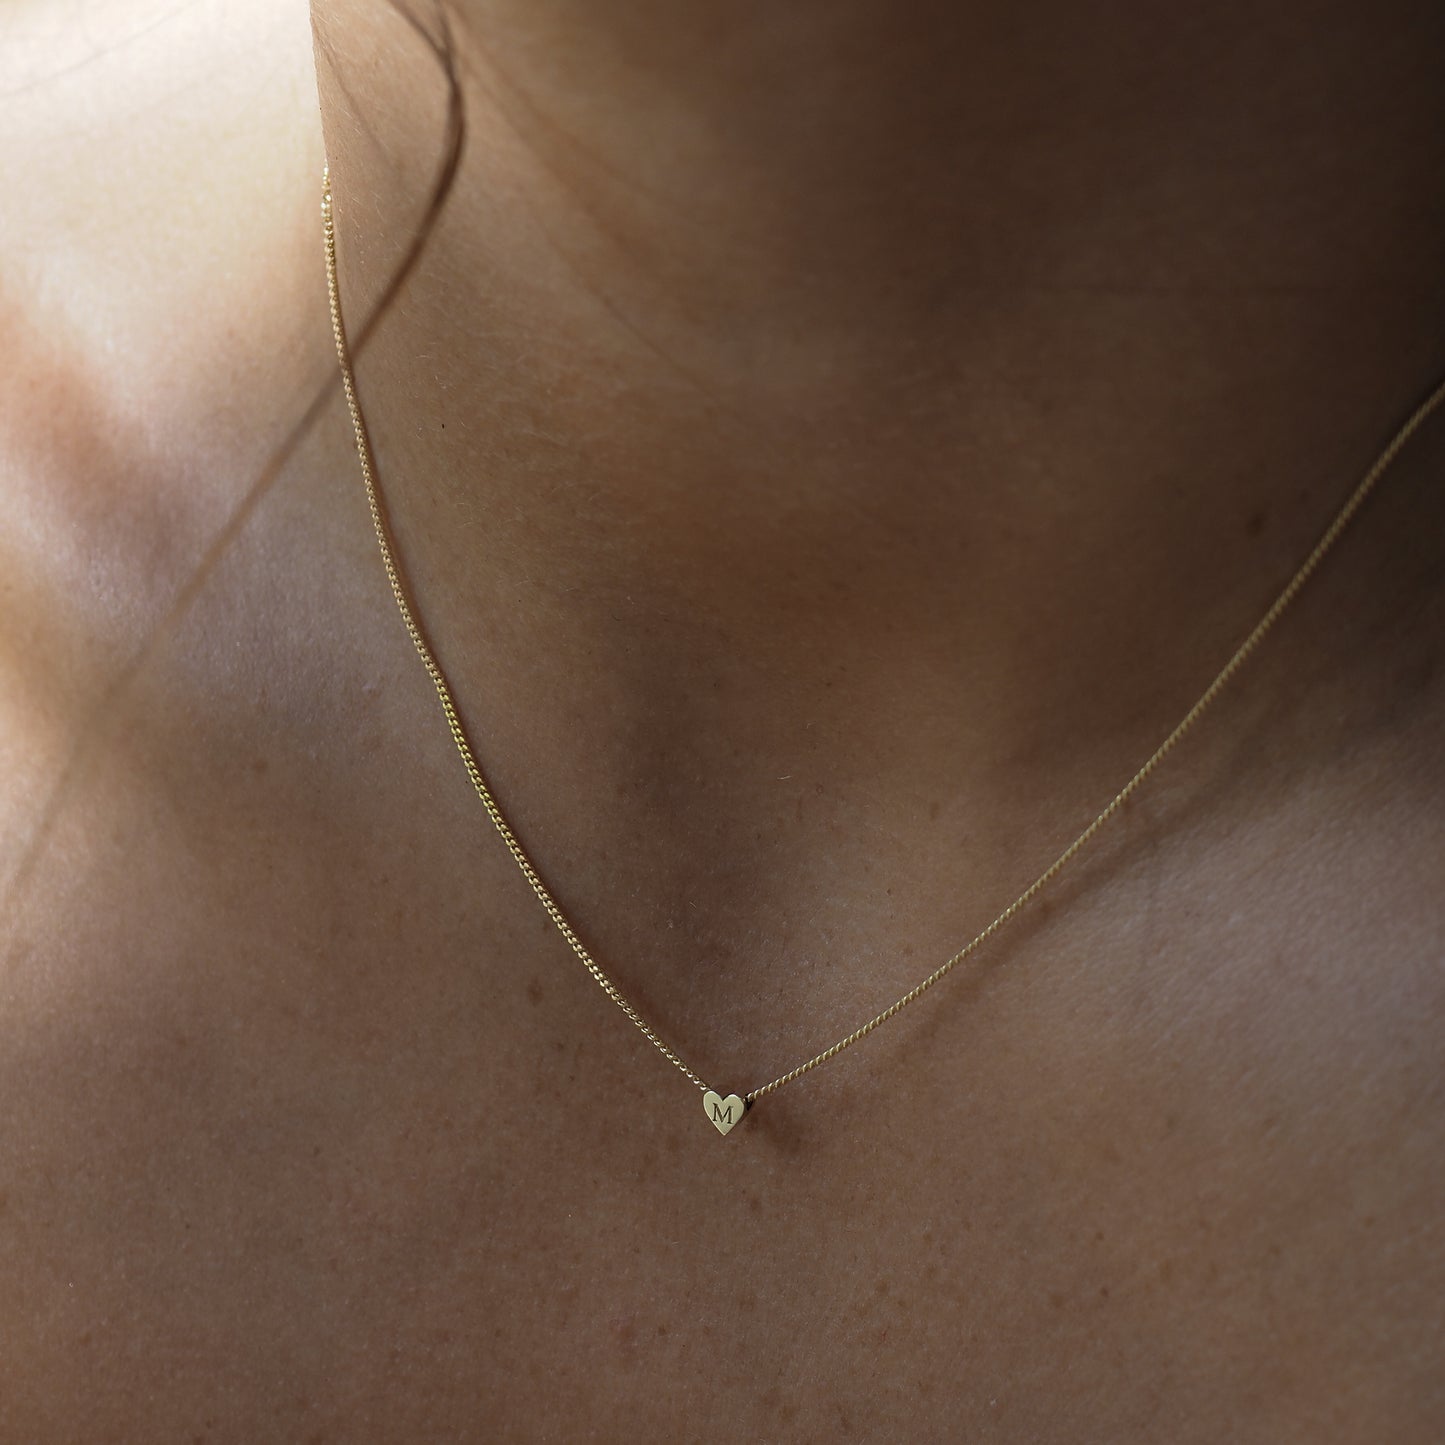 The Tiny Heart Necklace features a single letter engraved in the gold heart fixed in the centre of a yellow gold chain. 